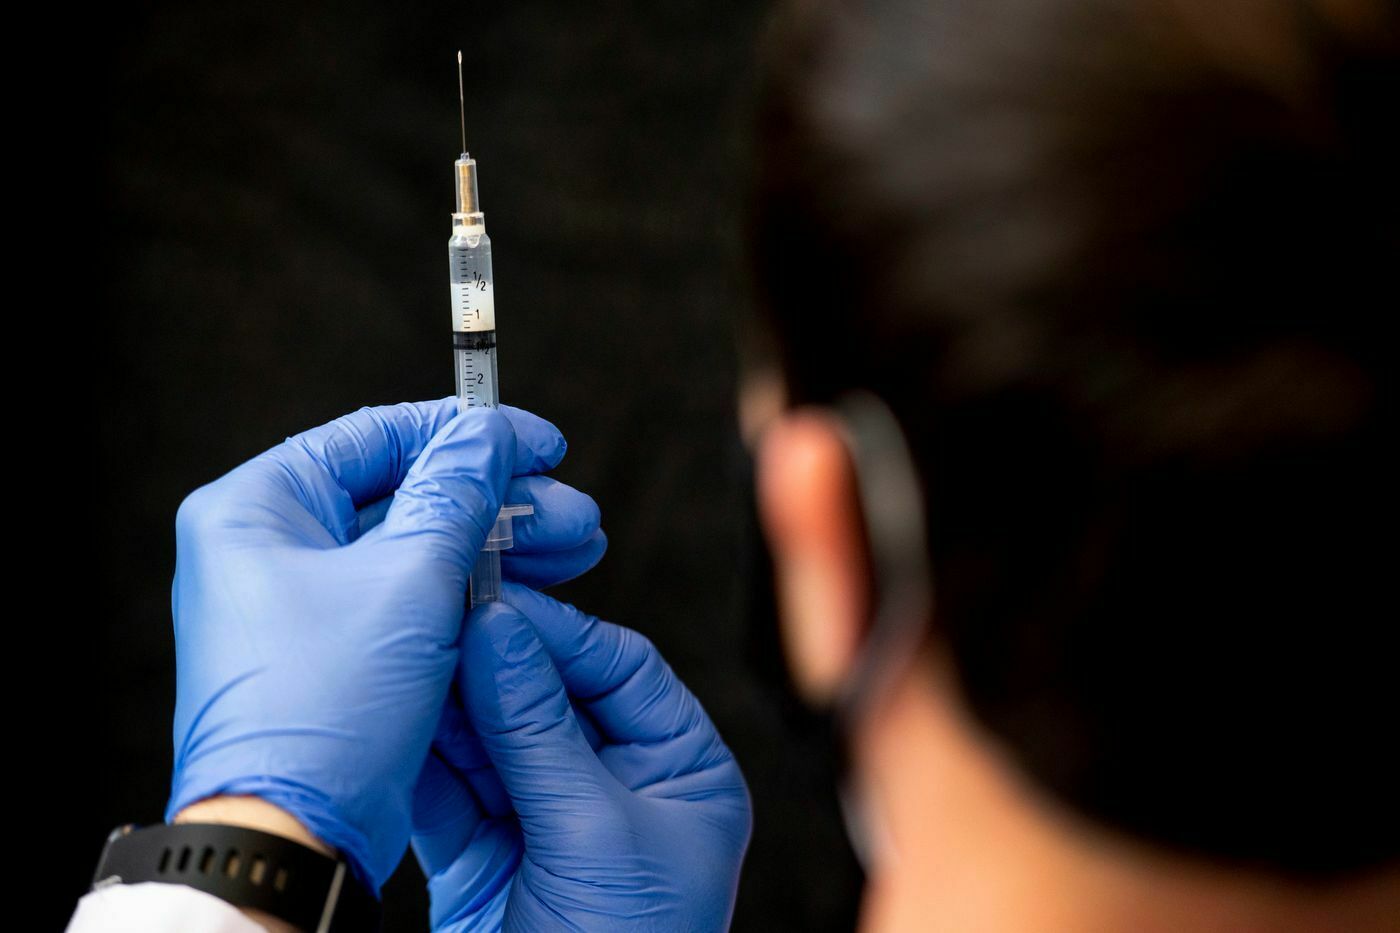 WHO: by 2022, the world will face an acute shortage of syringes for vaccination